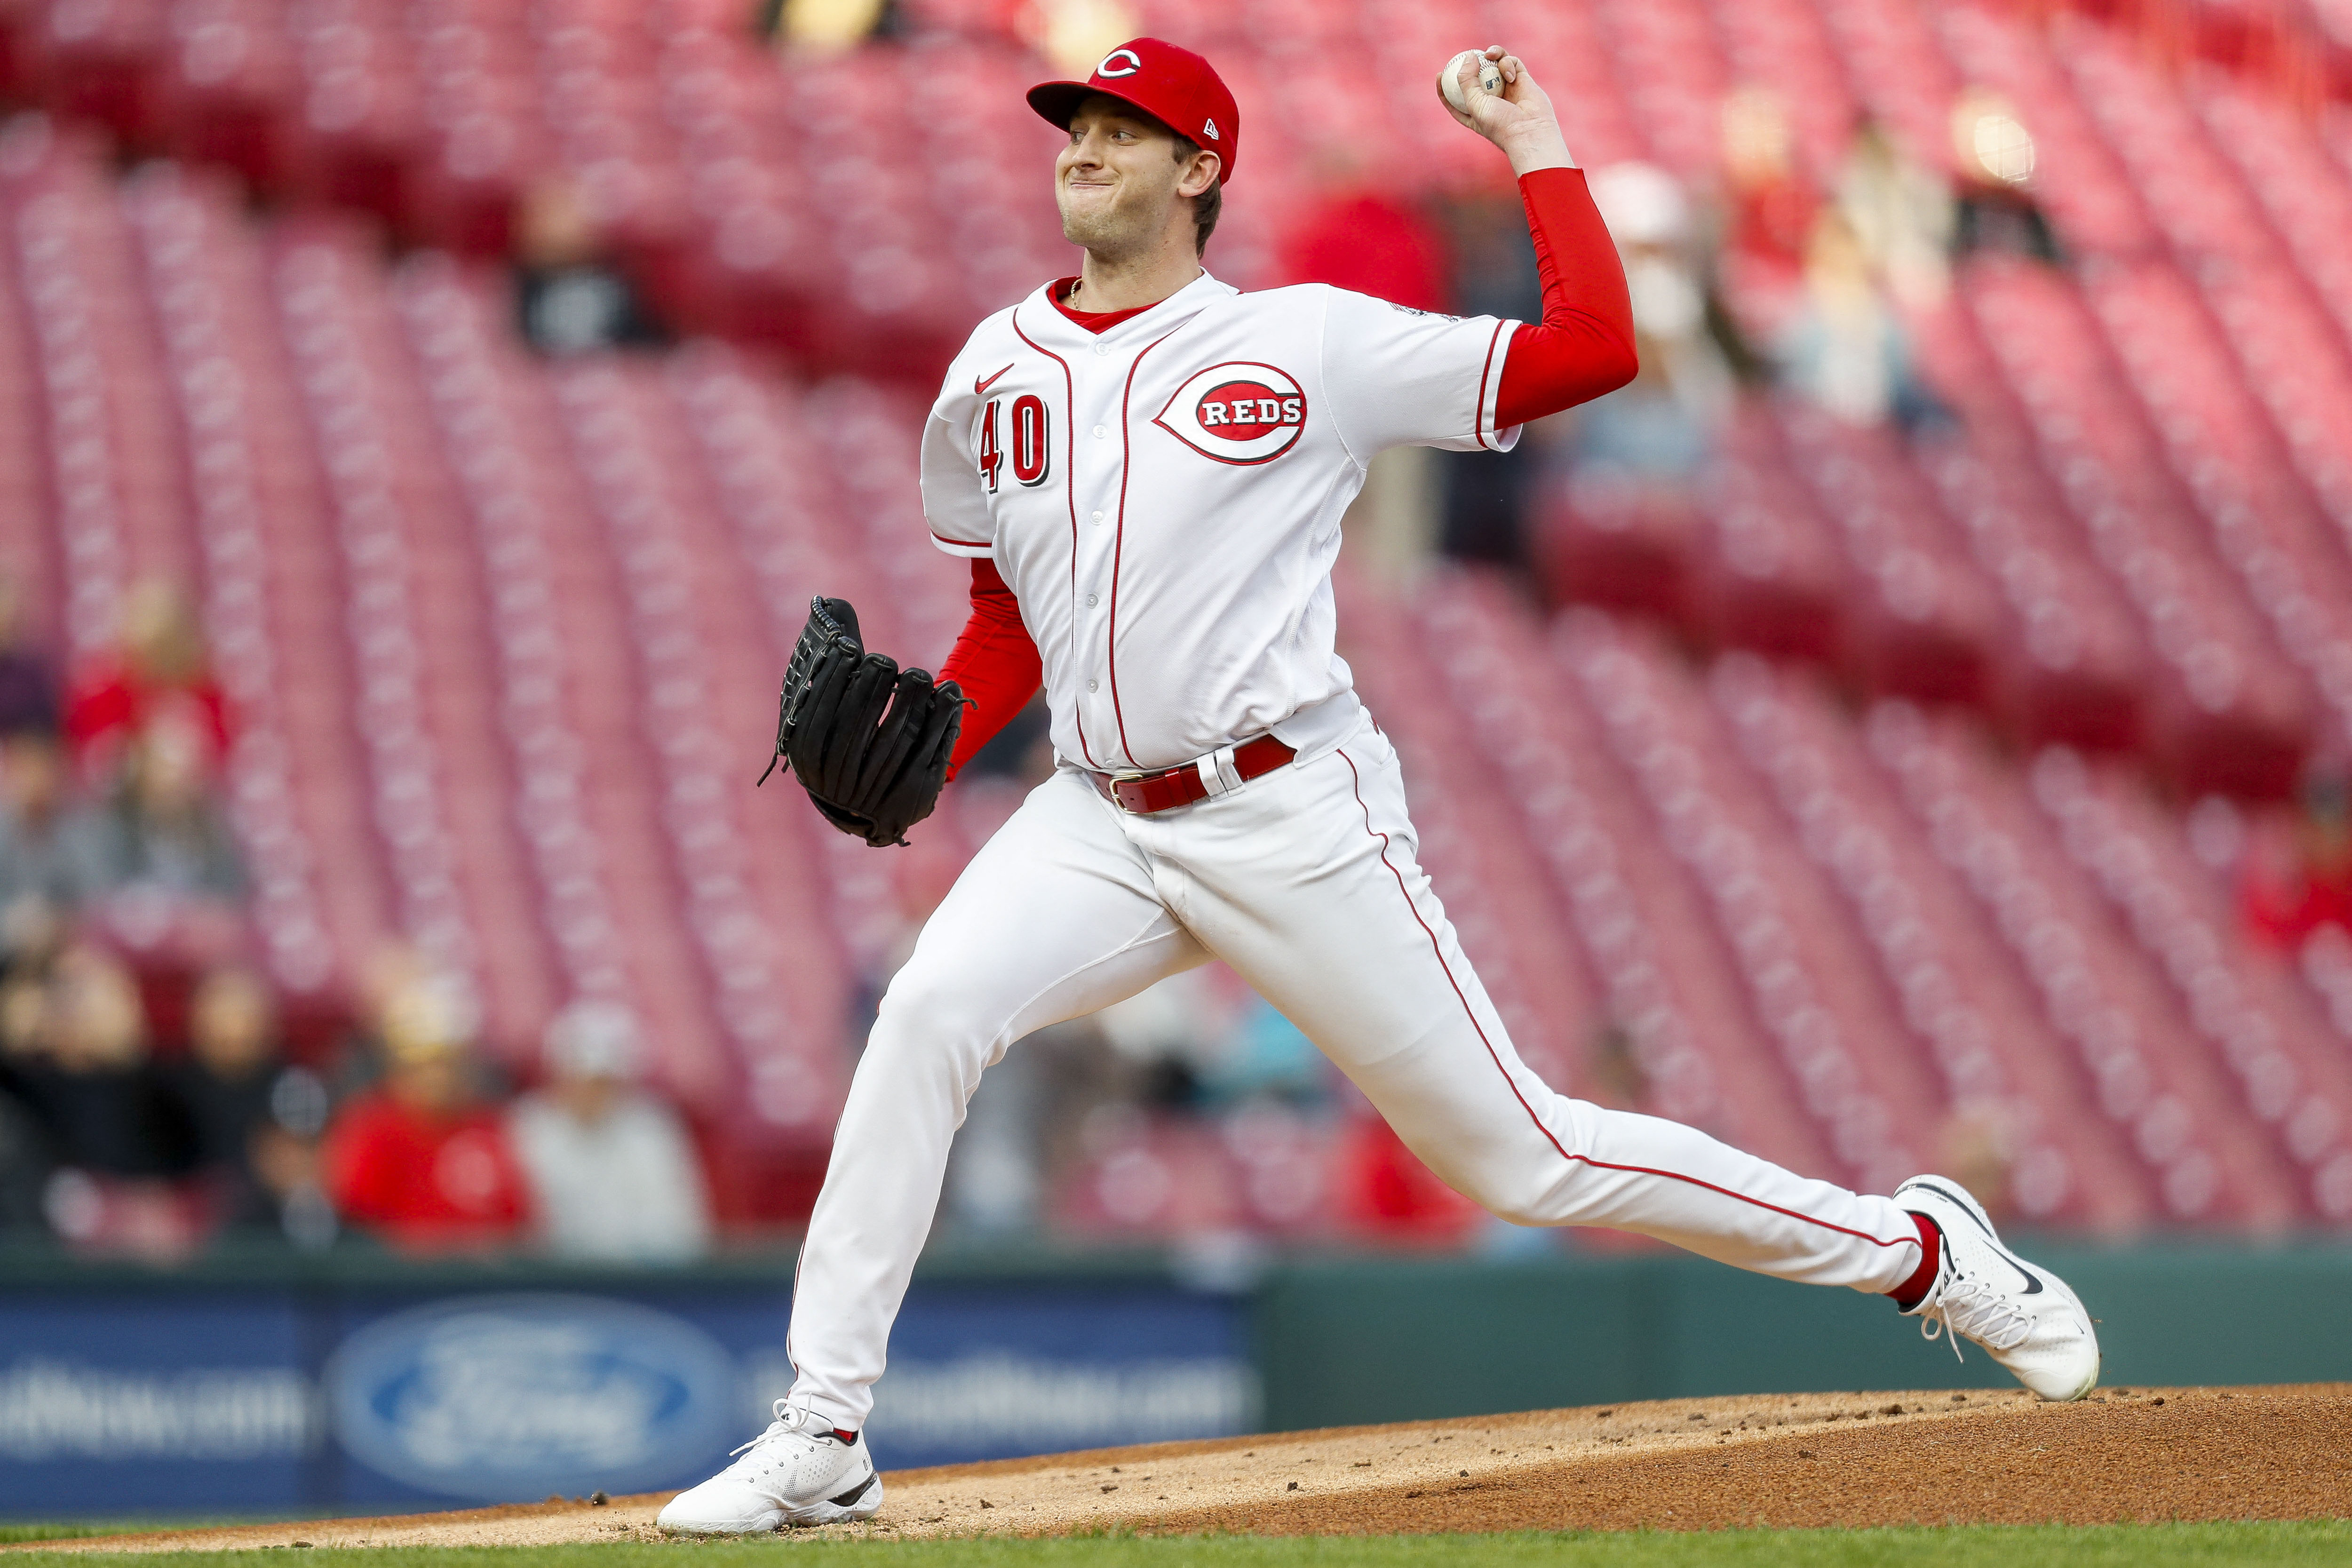 Cincinnati Reds starting pitcher Nick Lodolo (40) in action during